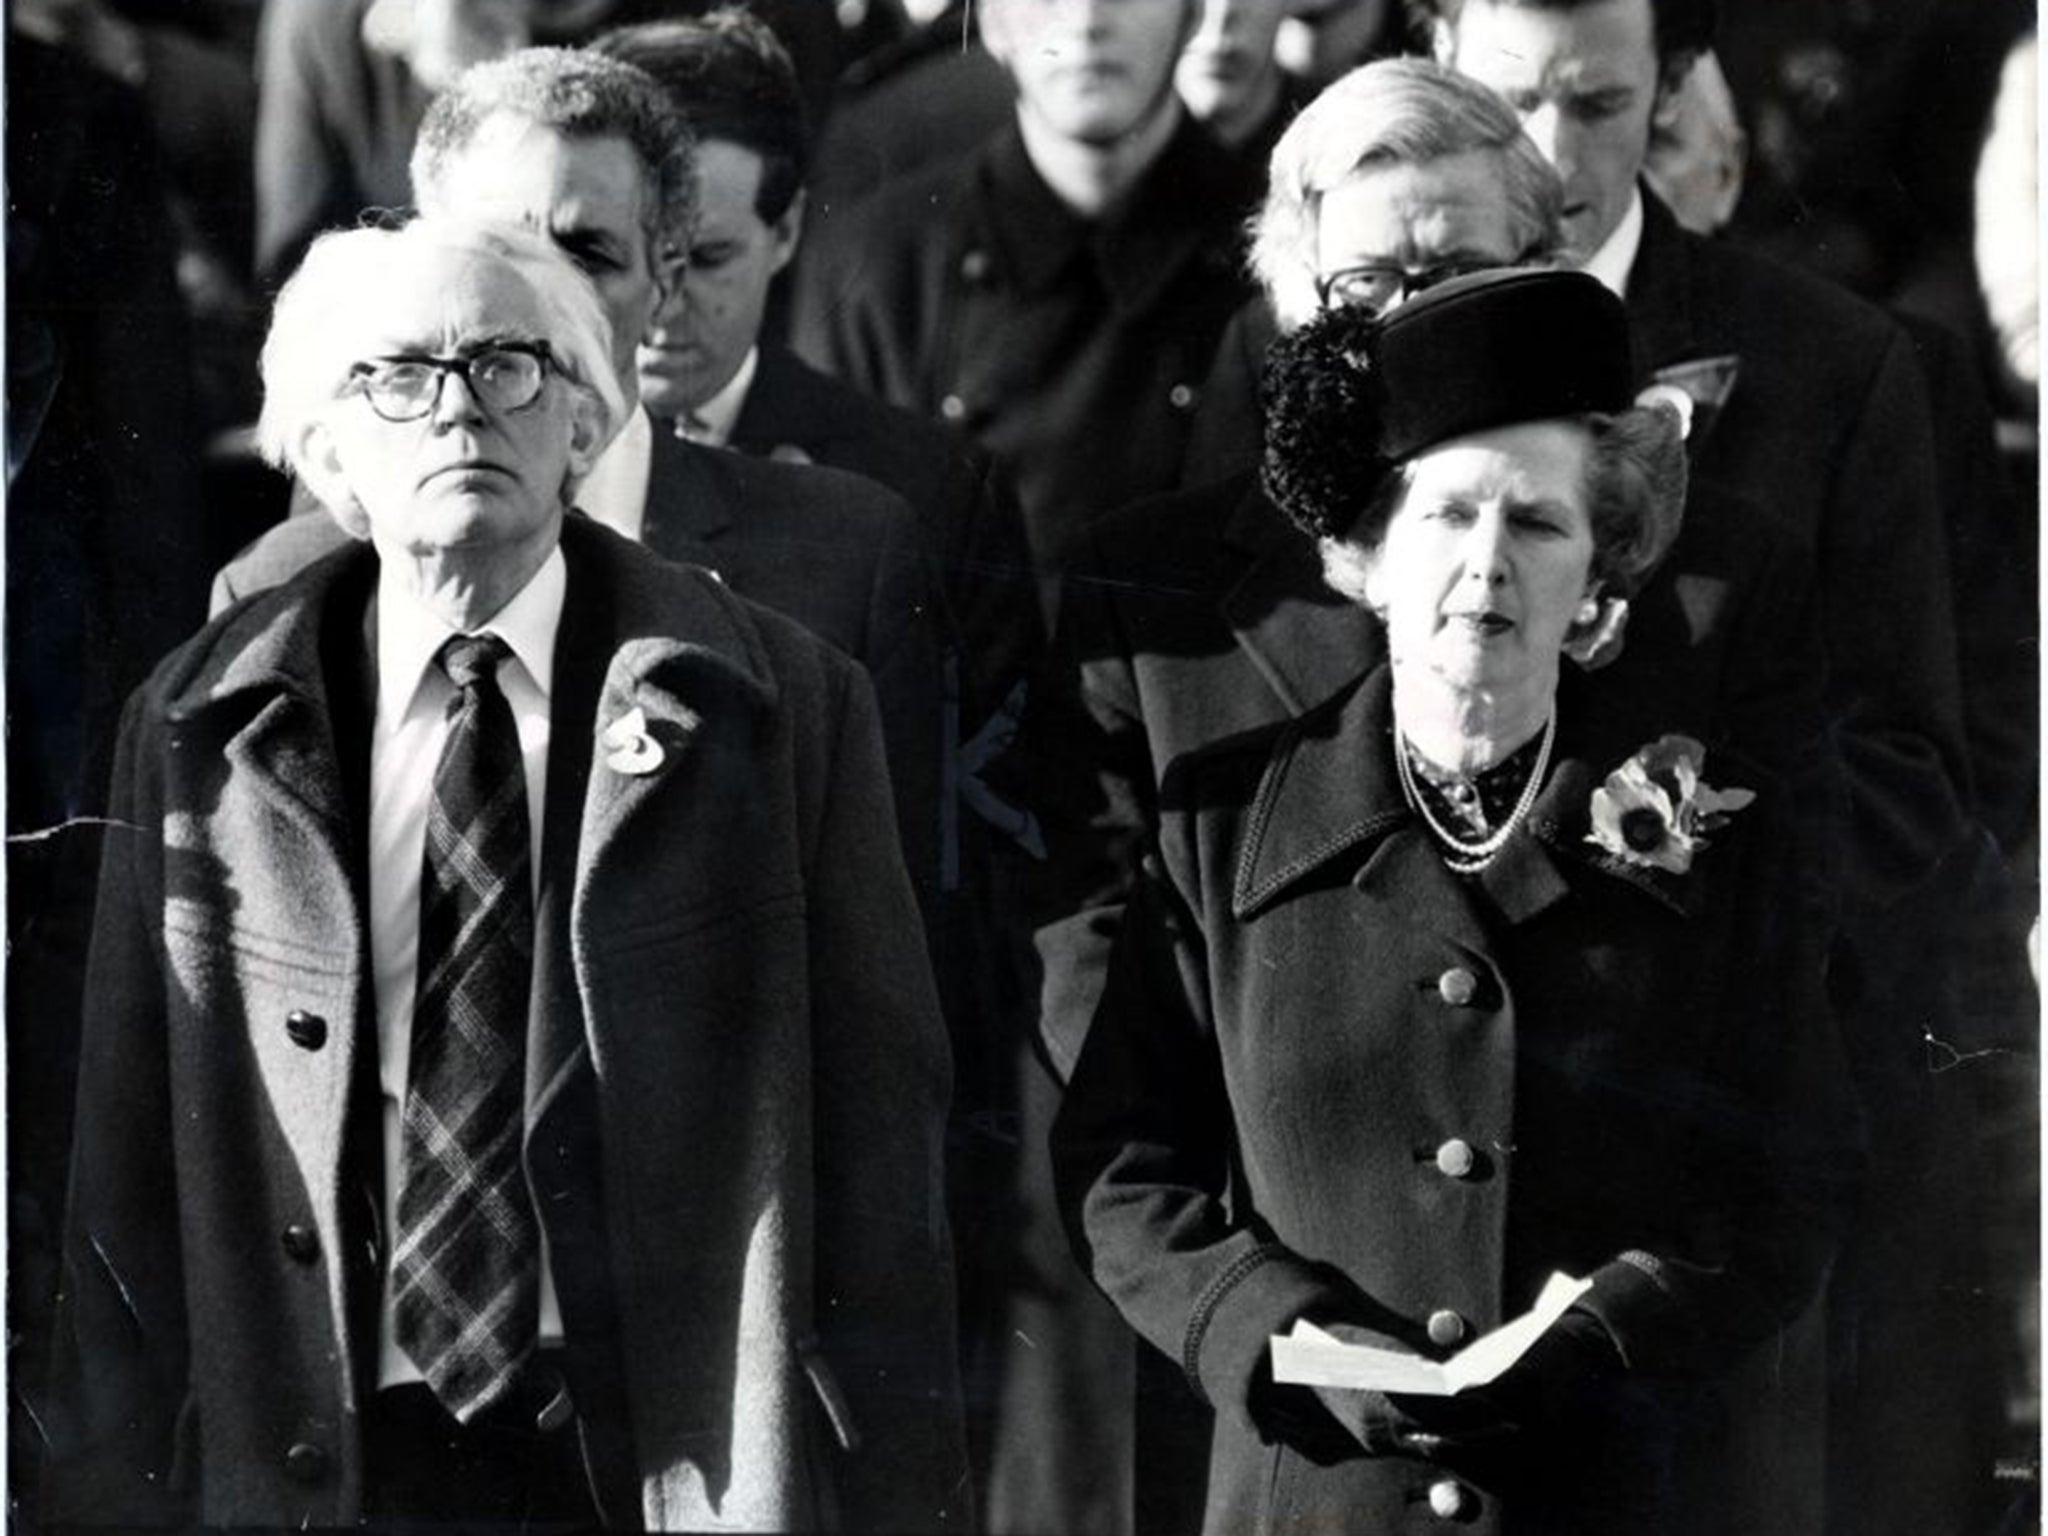 Michael Foot caused outrage for his choice of coat at the Cenotaph in 1981